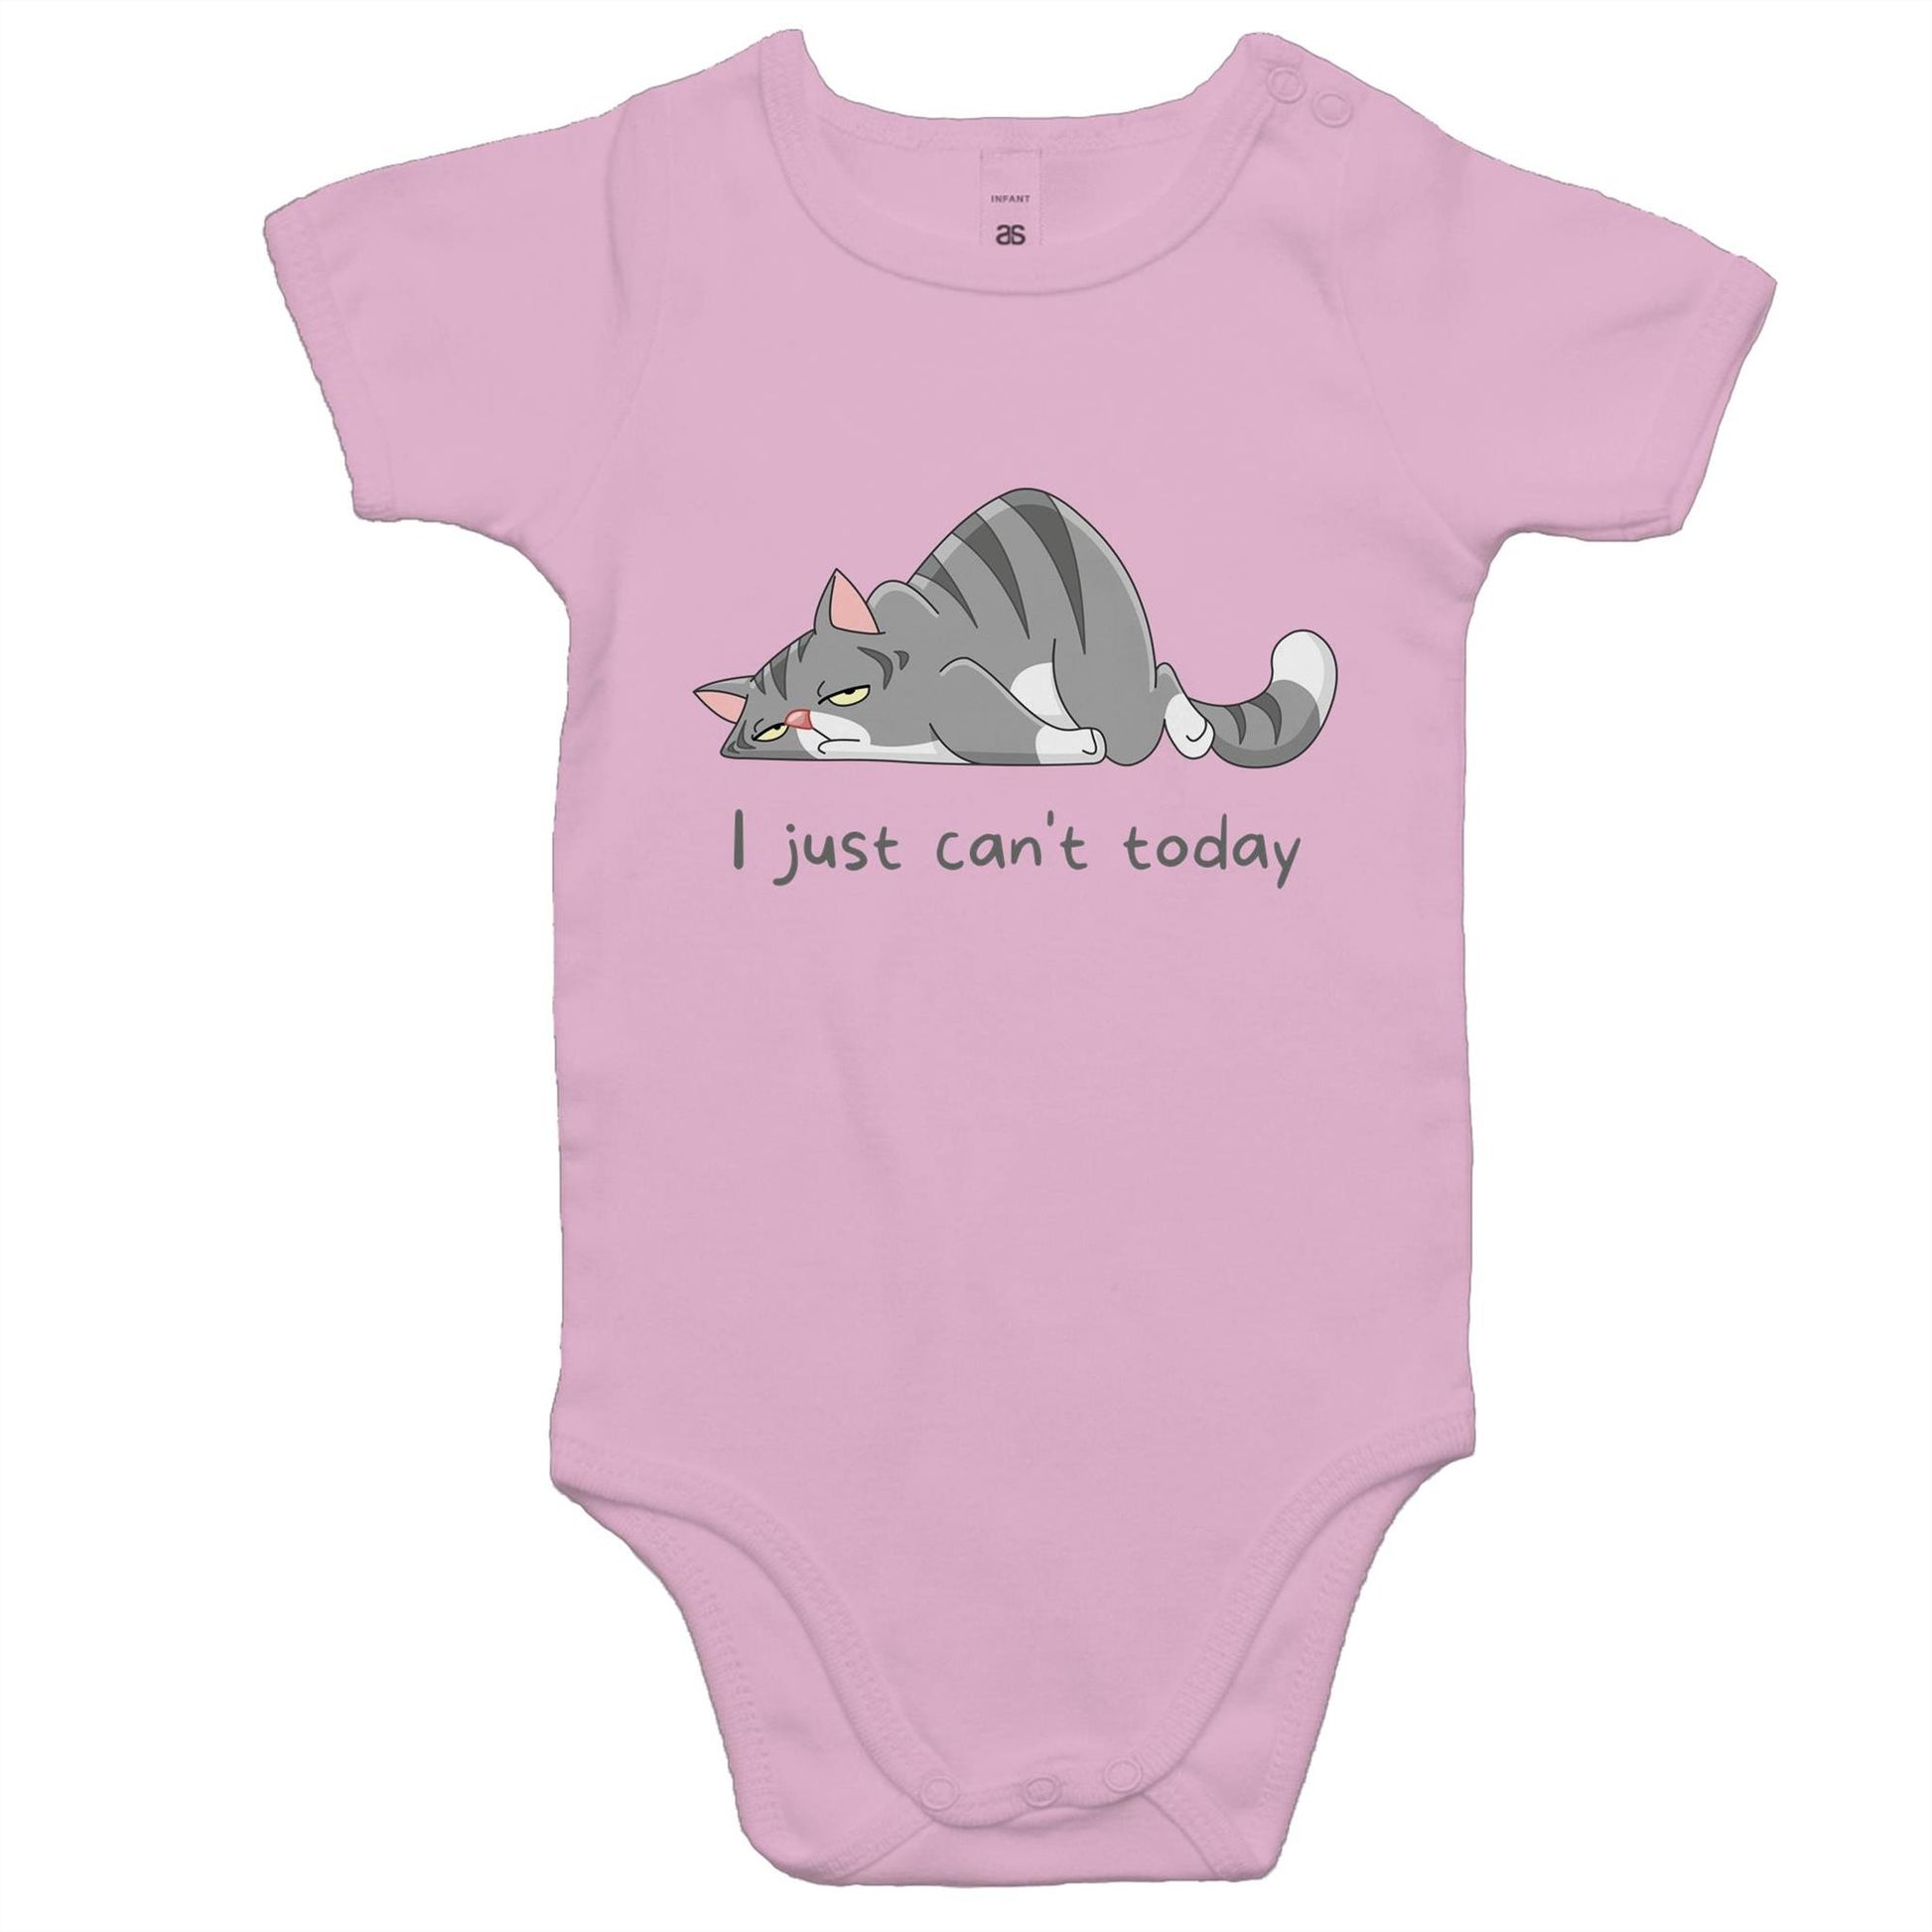 Cat, I Just Can't Today - Baby Bodysuit Pink Baby Bodysuit animal